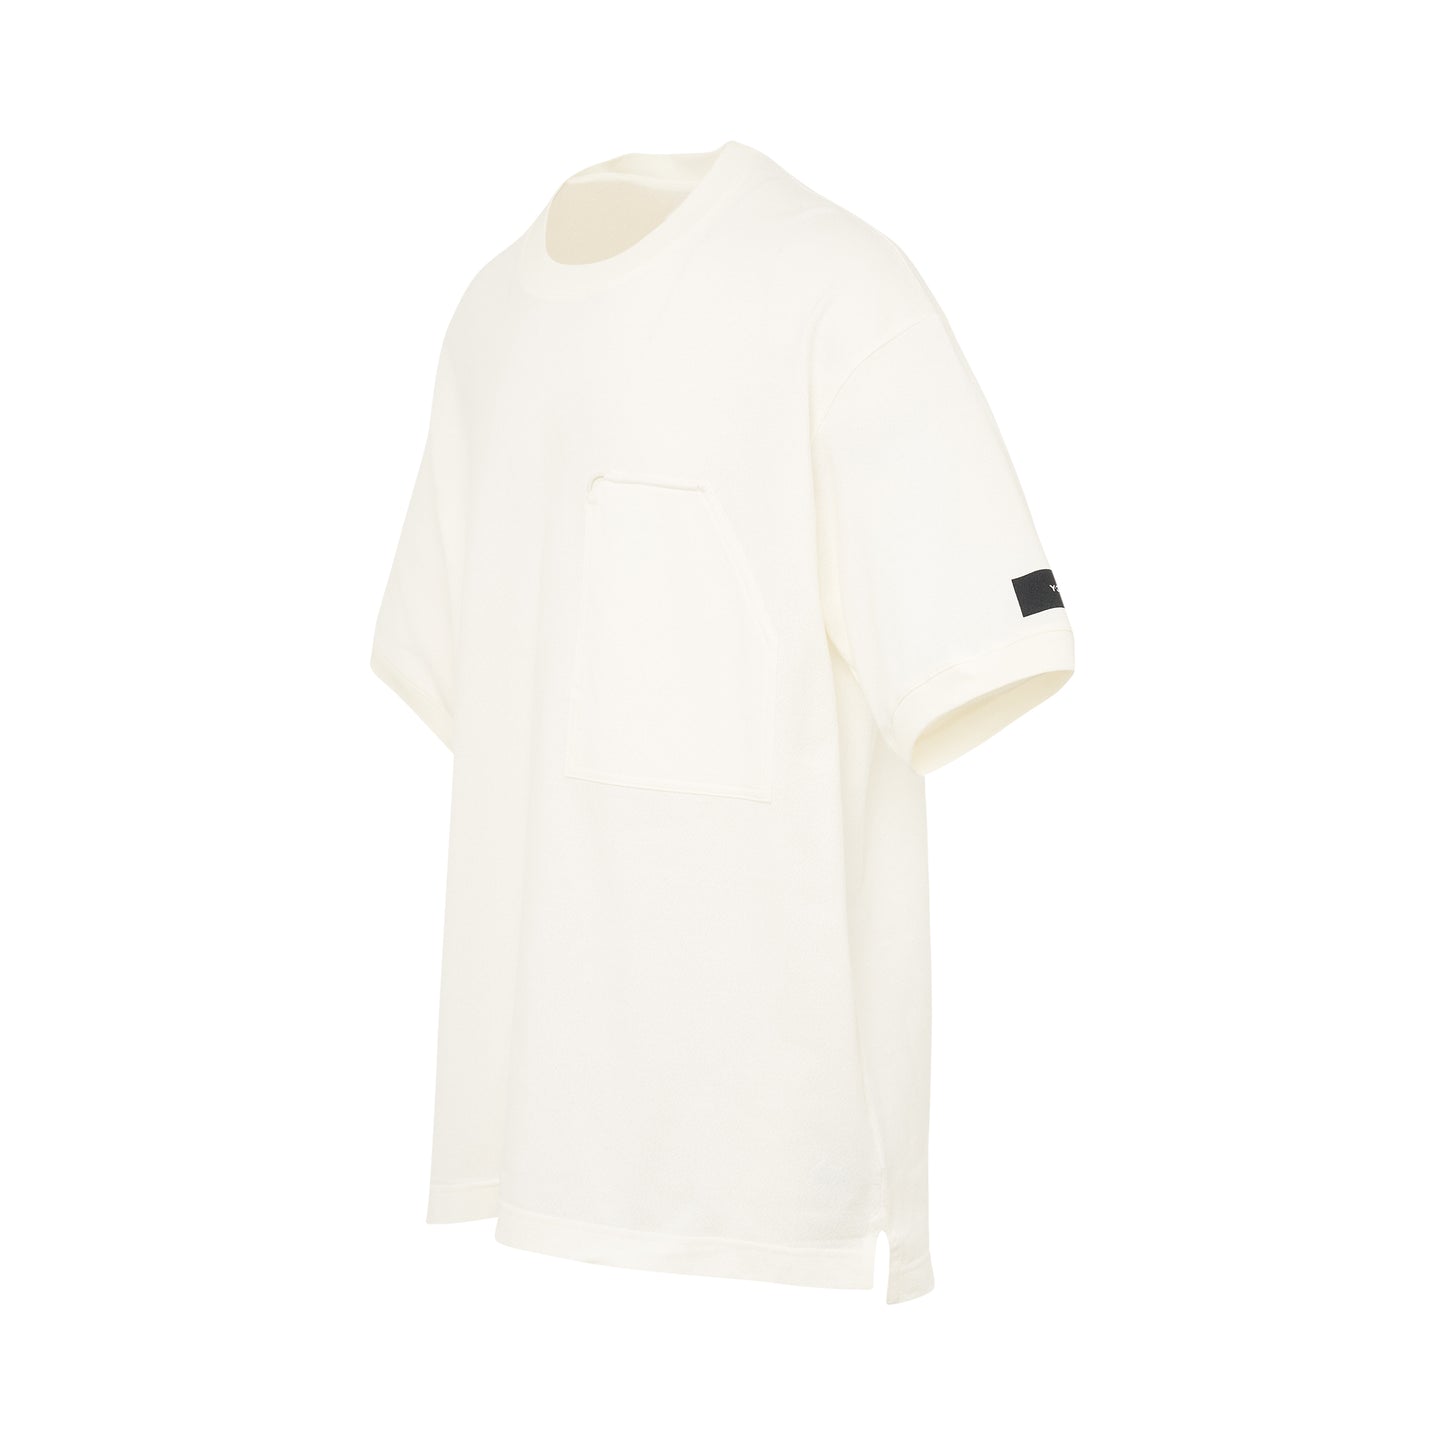 Workwear Short Sleeve T-Shirt in Off White